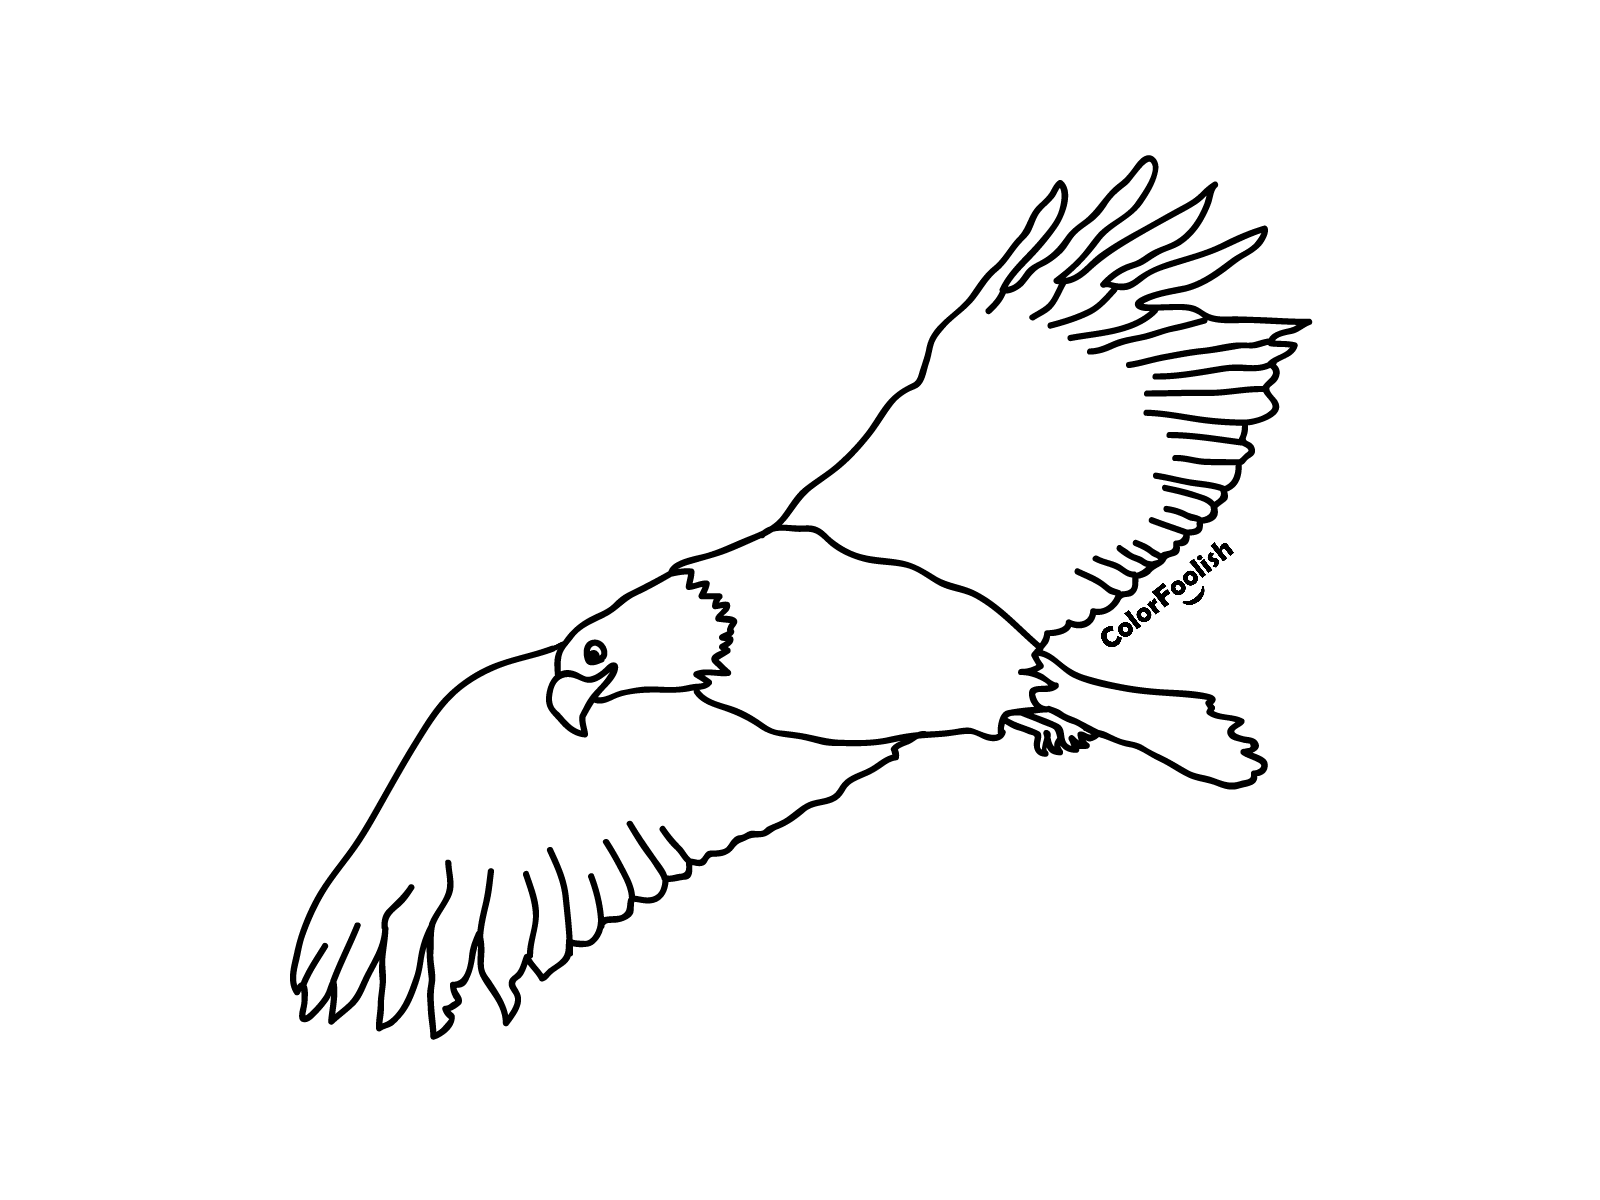 Coloring page of a flying eagle